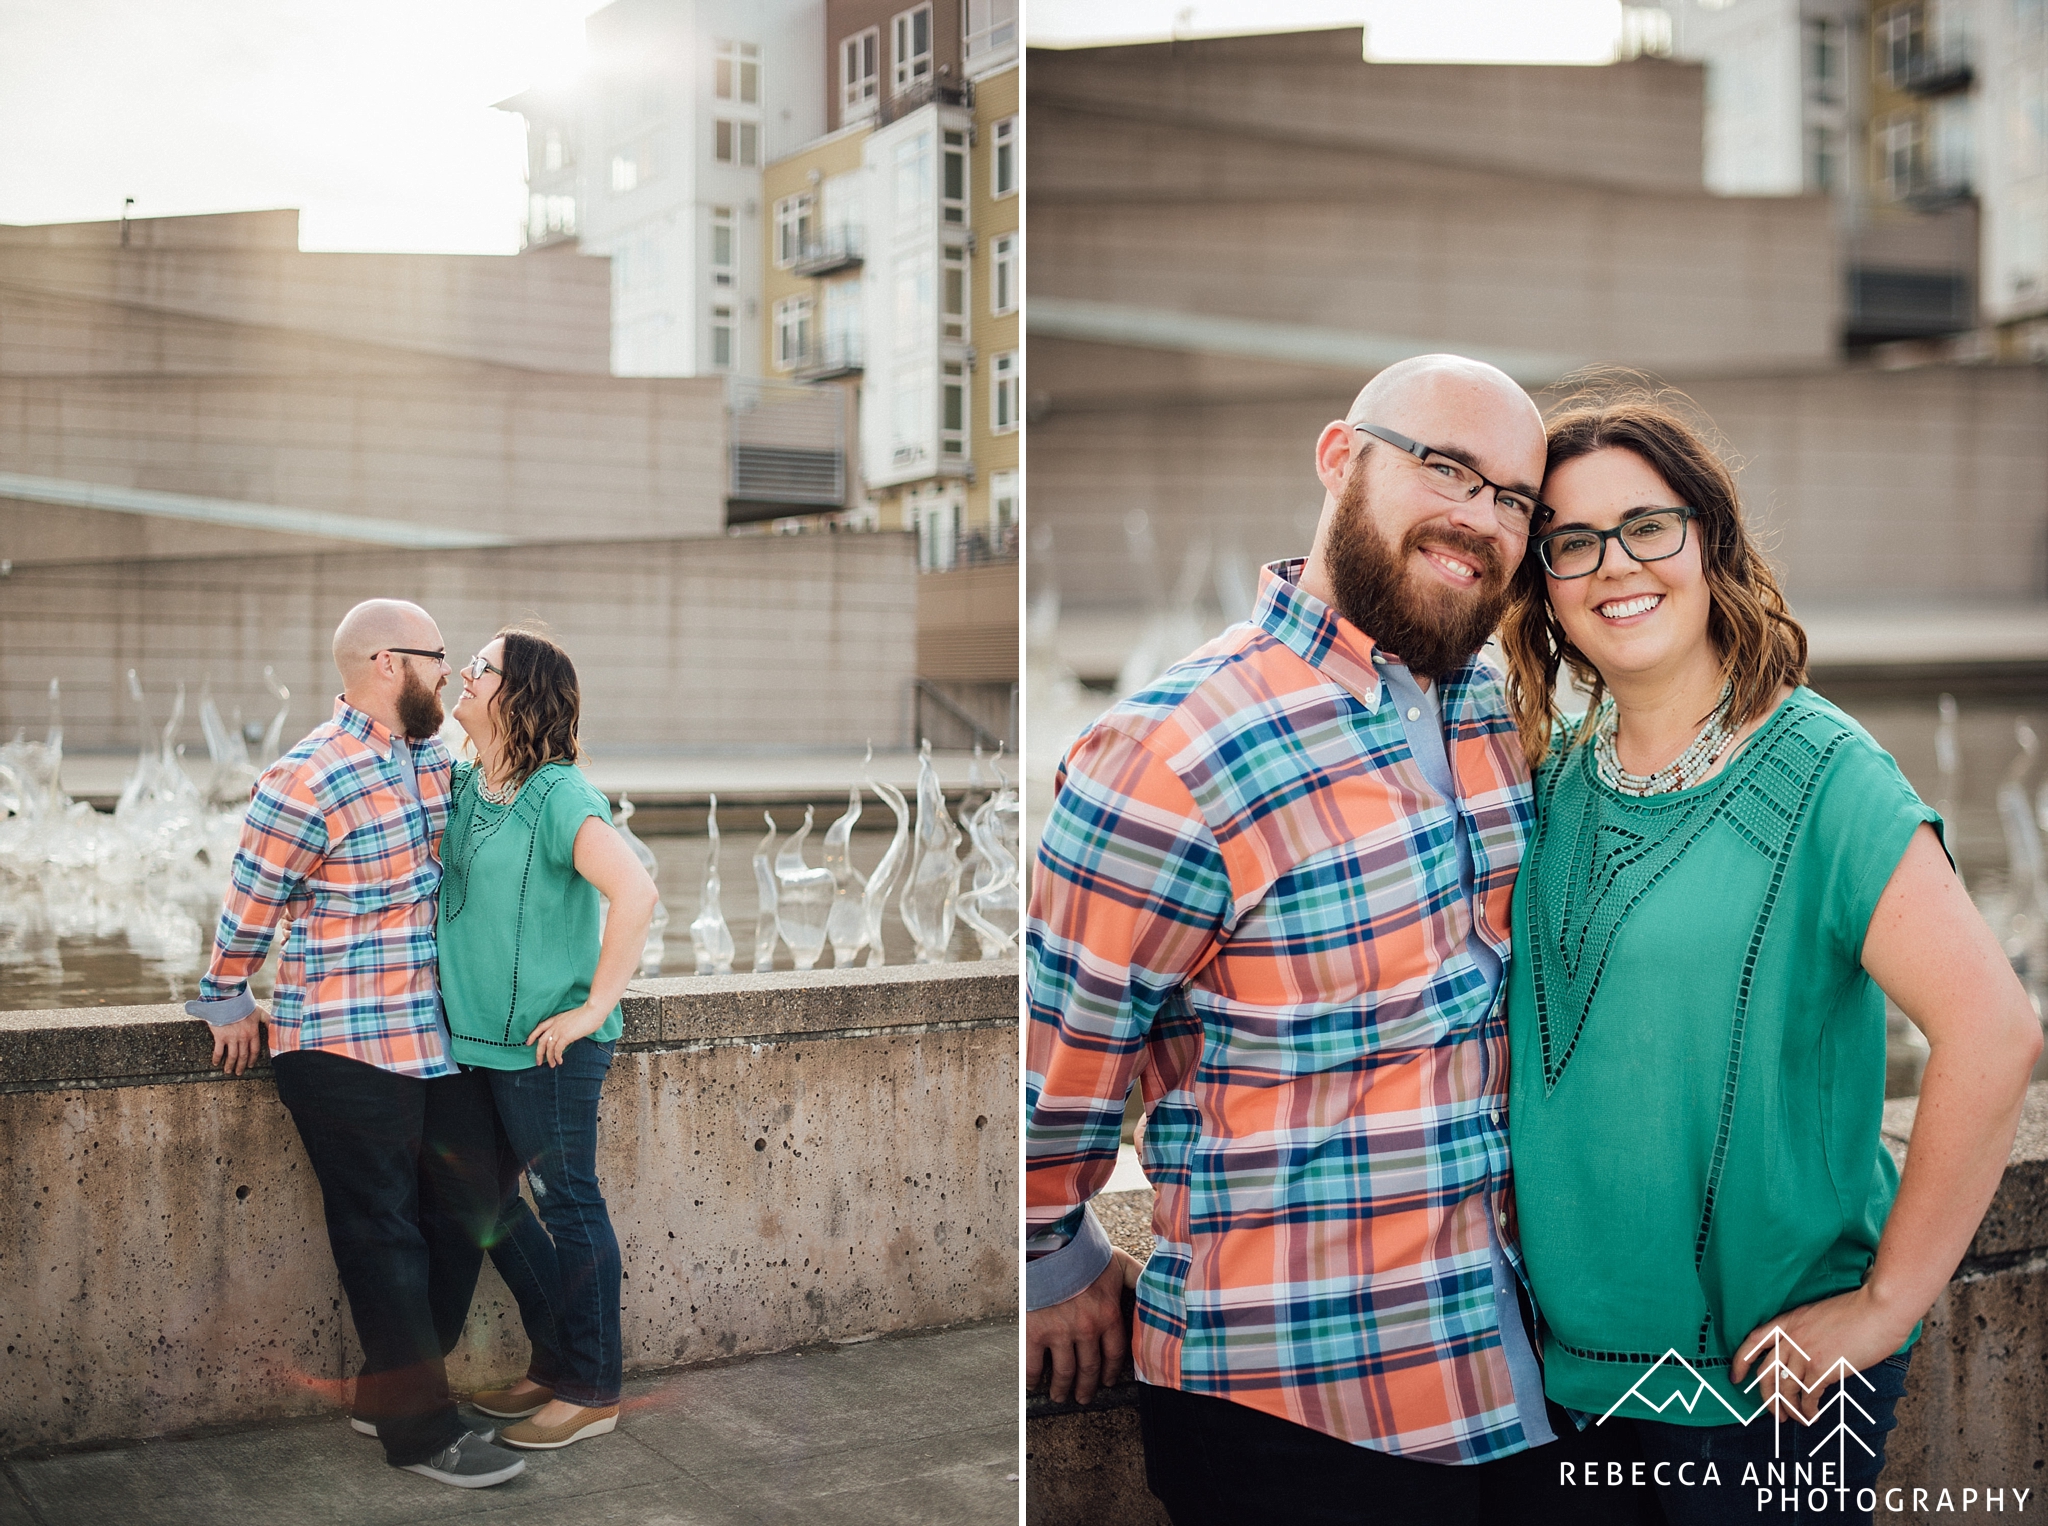 Downtown Tacoma Engagement,Downtown Tacoma Engagement Photographer,Downtown Tacoma Engagement Photos,Seattle Engagement Photographer,Washington Engagement Photographer,PNW Engagement Photographer,